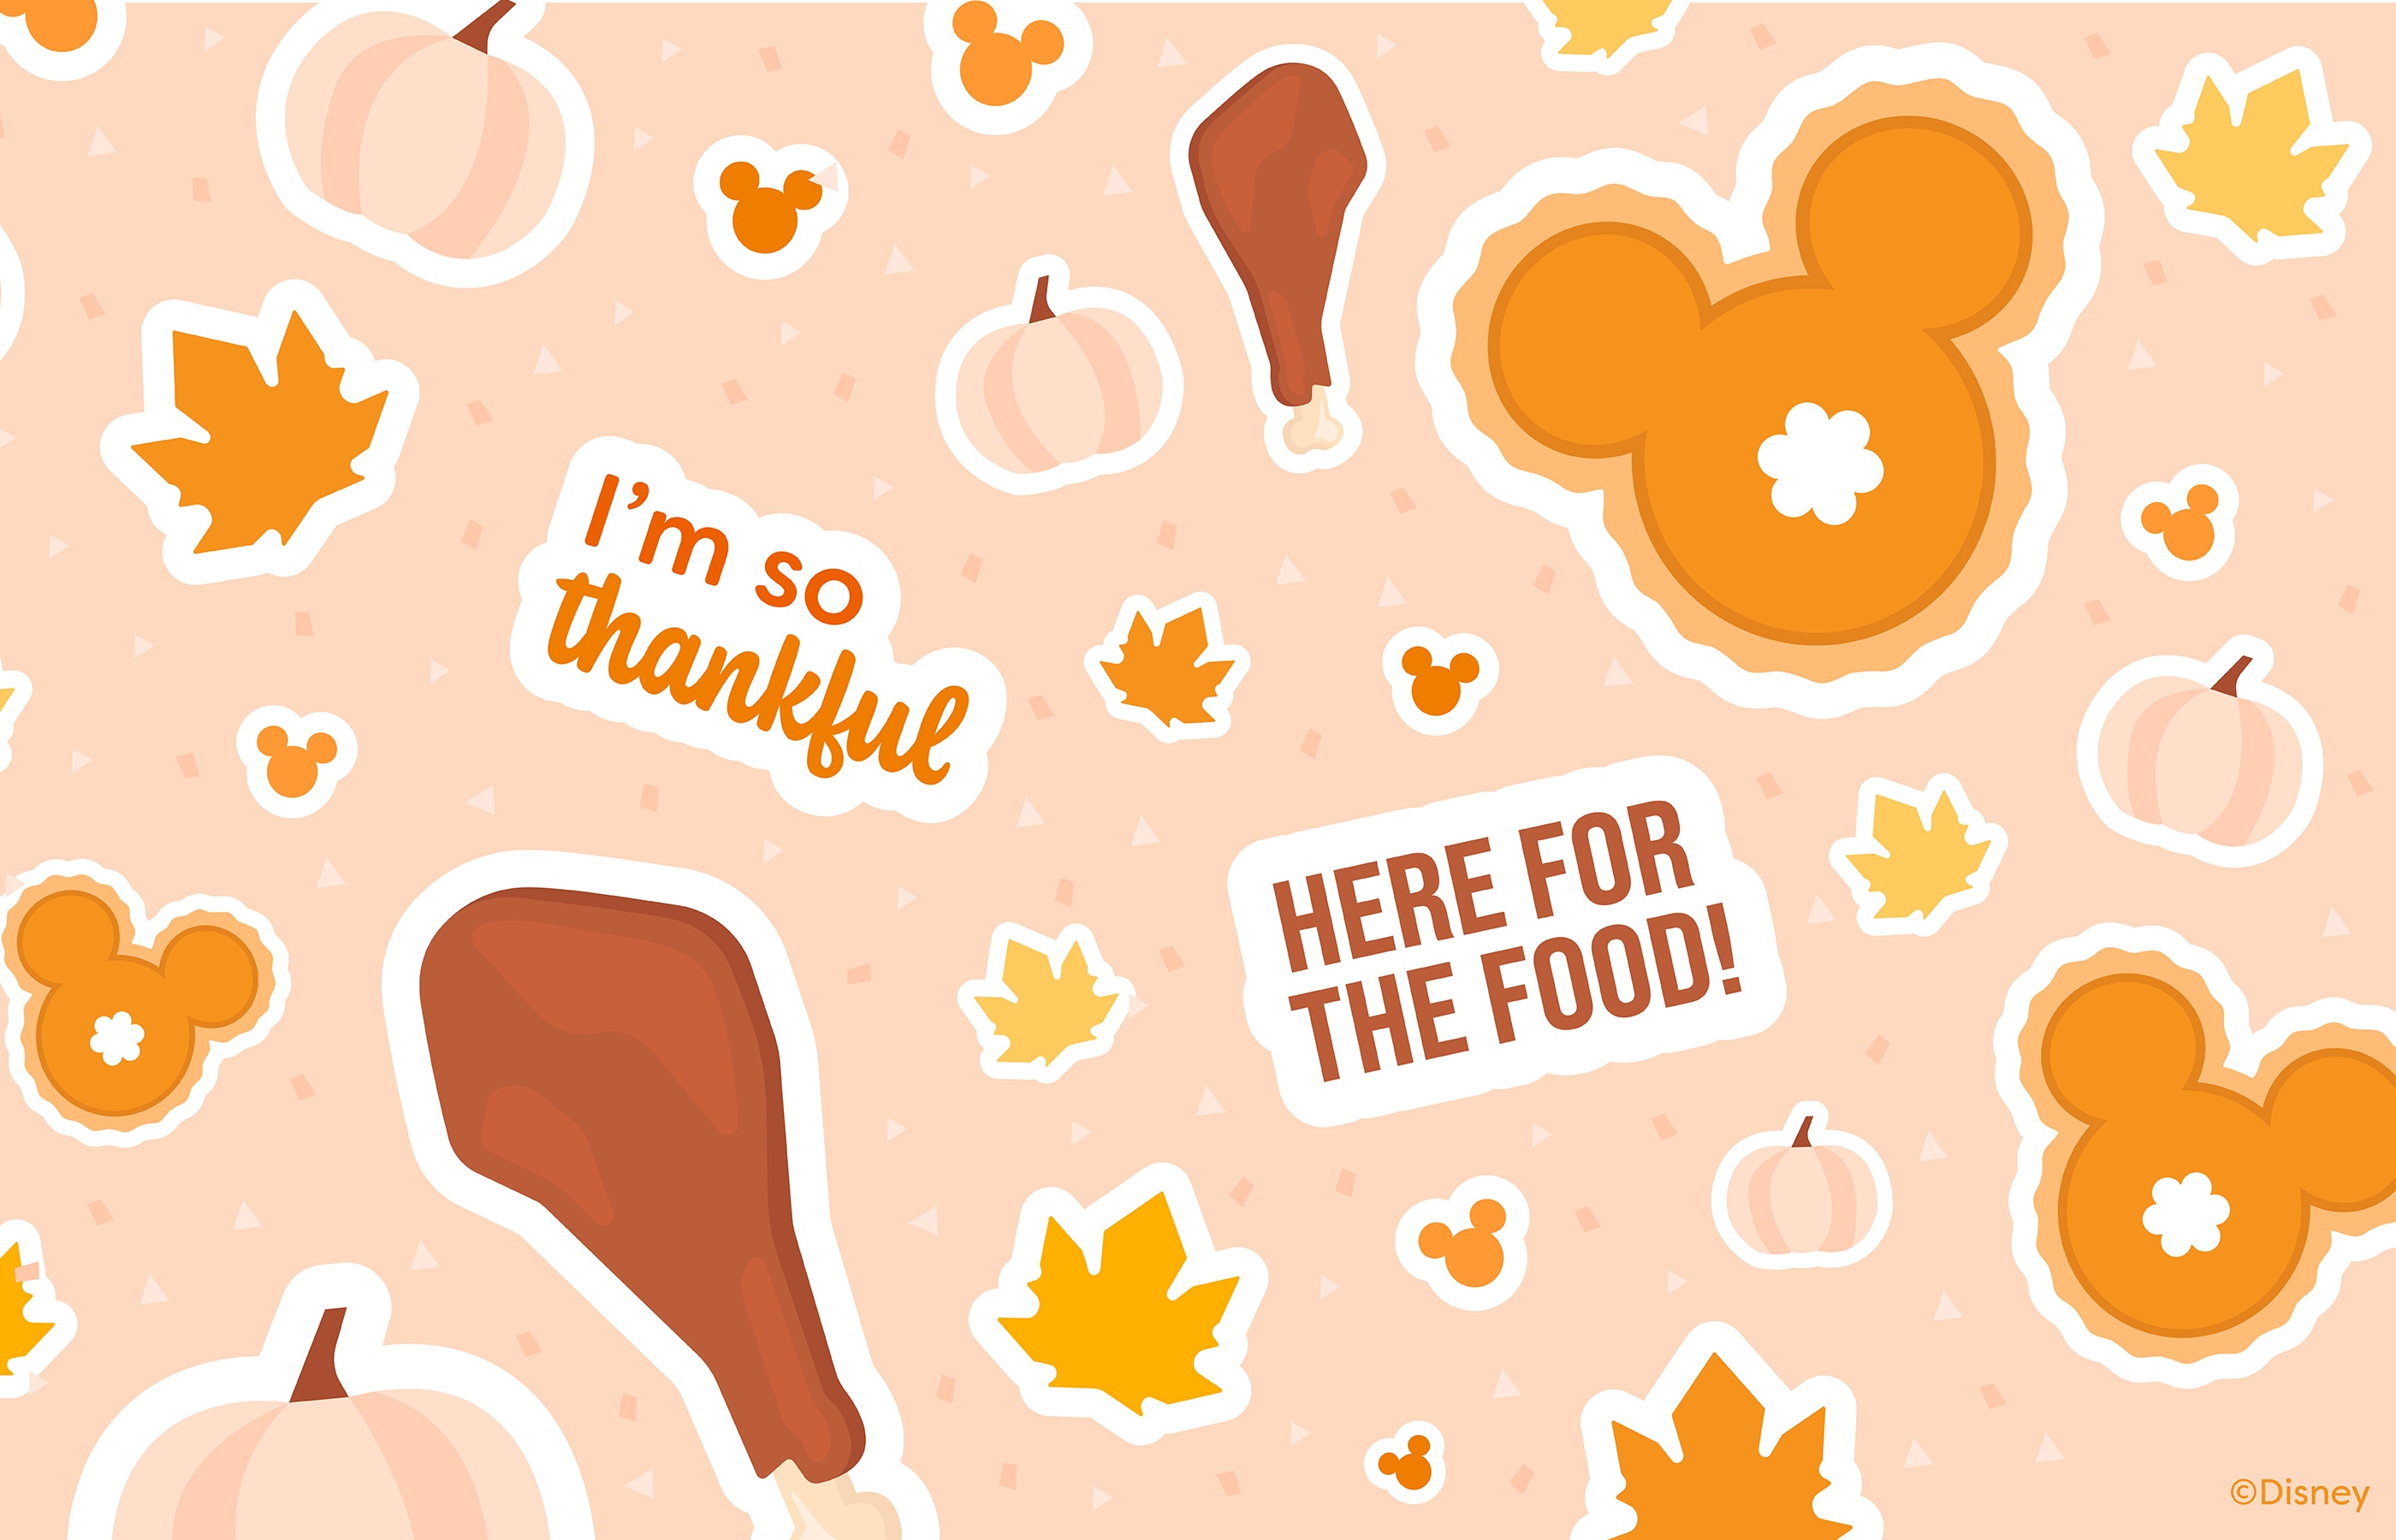 New Disney Thanksgiving Wallpapers, Backgrounds, Instagram Stickers |  Disney Parks Blog